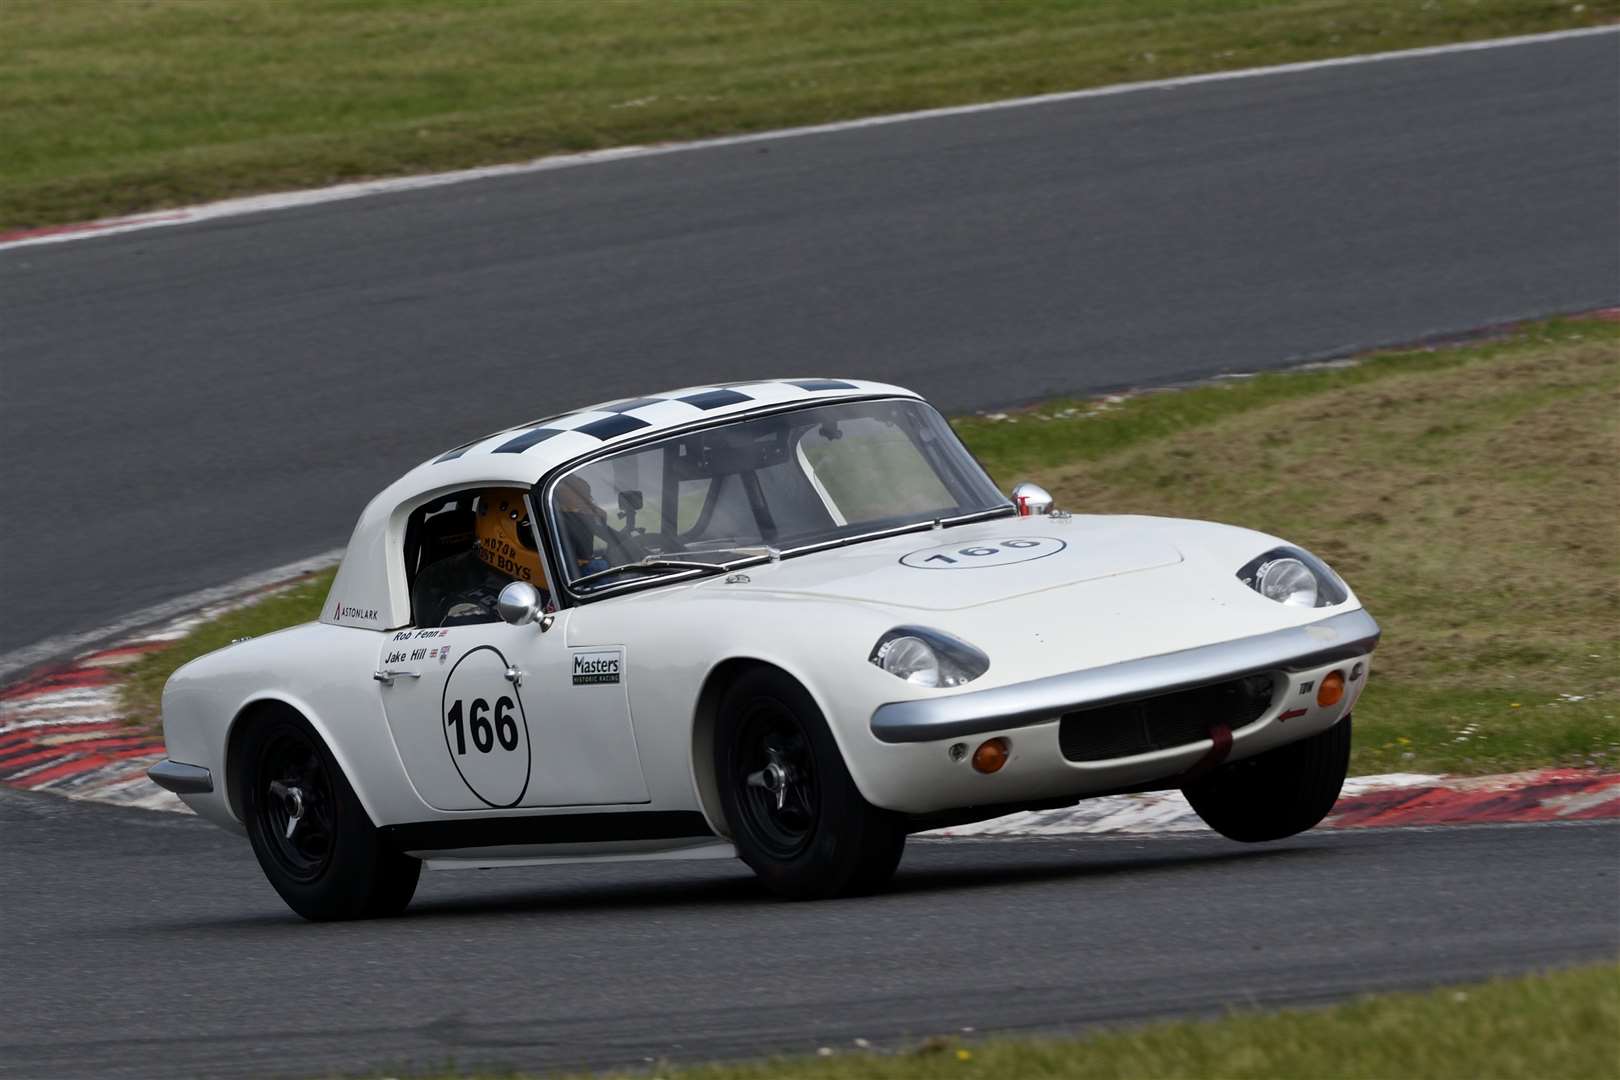 Jake Hill from Goudhurst and Rob Fenn from West Kingsdown finished second in class and sixth overall in their Lotus Elan 26R in the Gentlemen Drivers race. Picture: Simon Hildrew